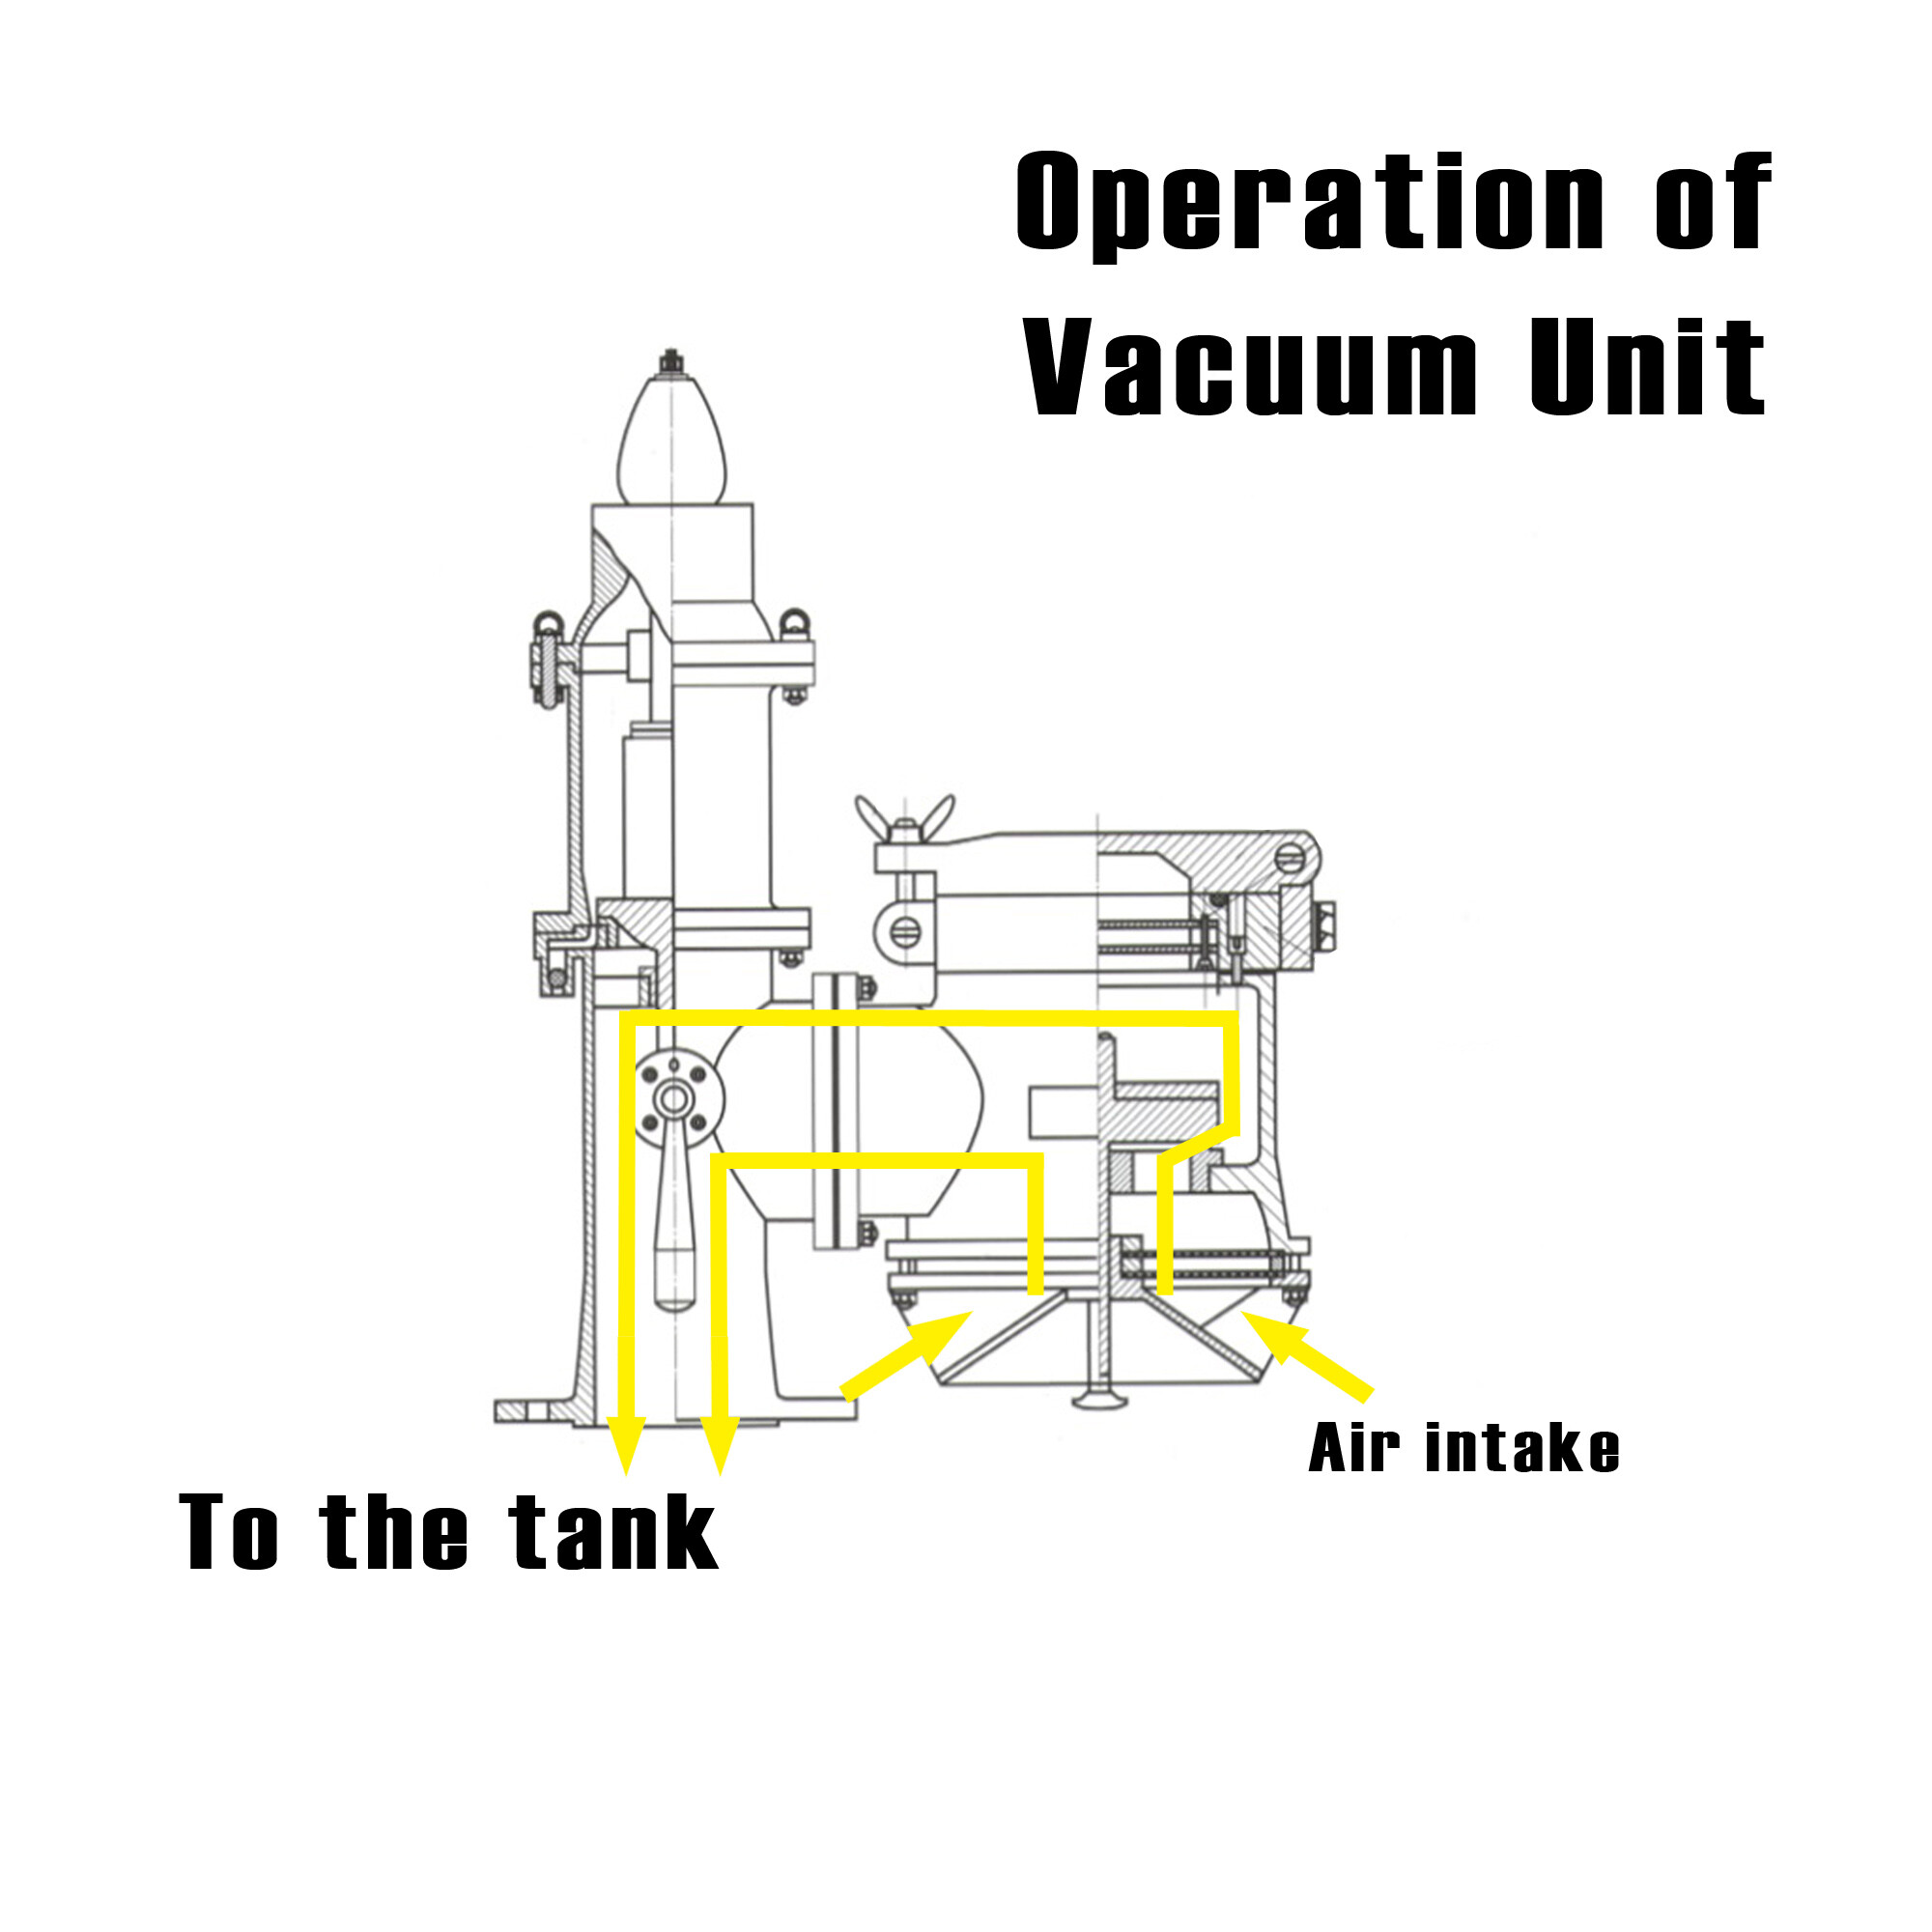 Operation of the vacuum unit showing arrows coming in and going inside the tank.